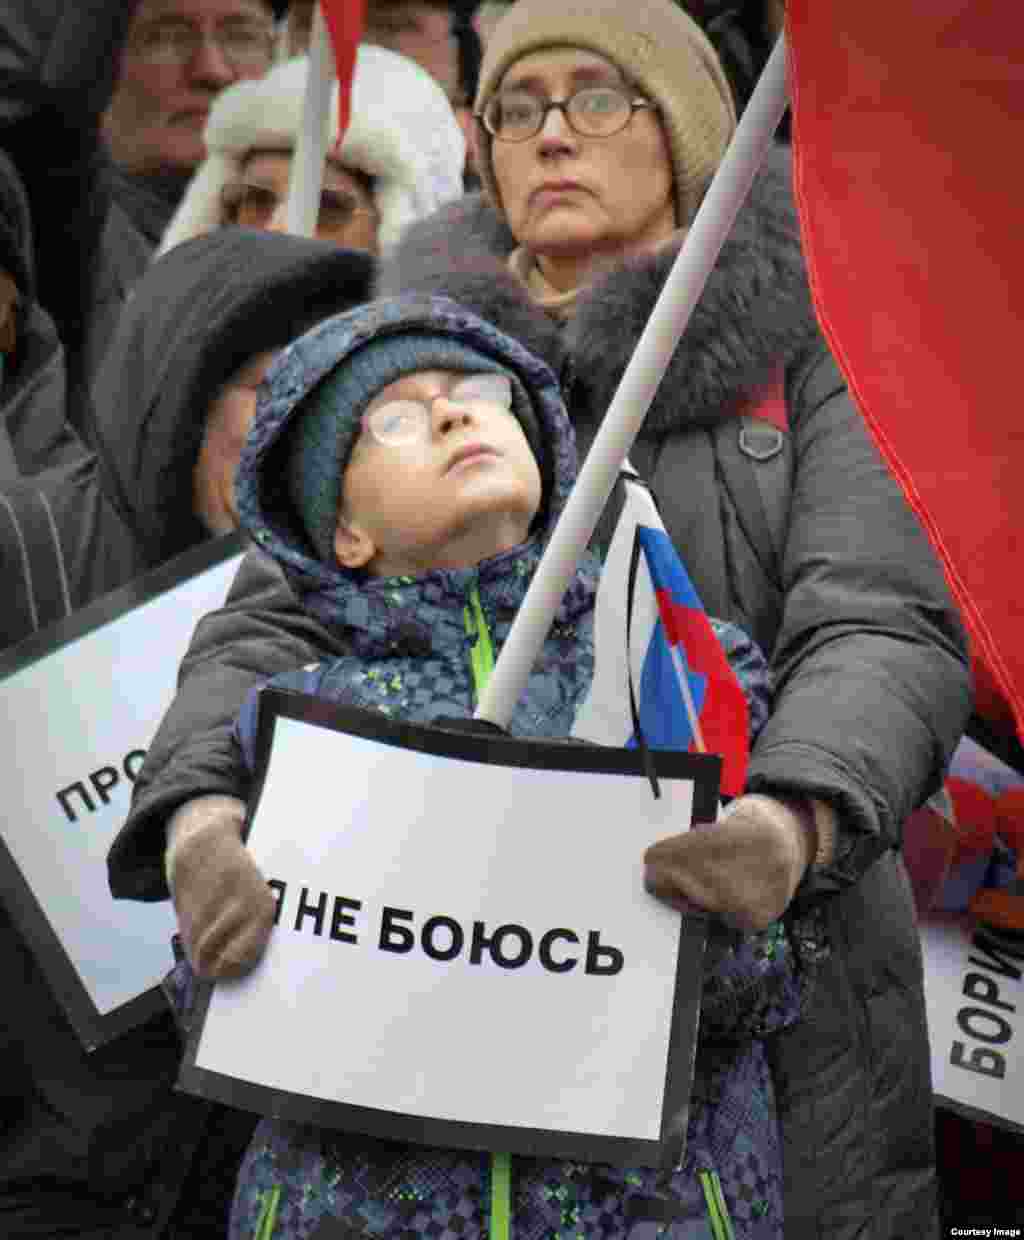 A woman holds a sign reading &quot;I am not afraid&quot; during a march in Moscow, Russia, in memory of opposition leader Boris Nemtsov who was shot and killed near the Kremlin on Feb. 27, 2015. (Photo taken by Vladimir Zablitsky from Moscow on March 1, 2015)